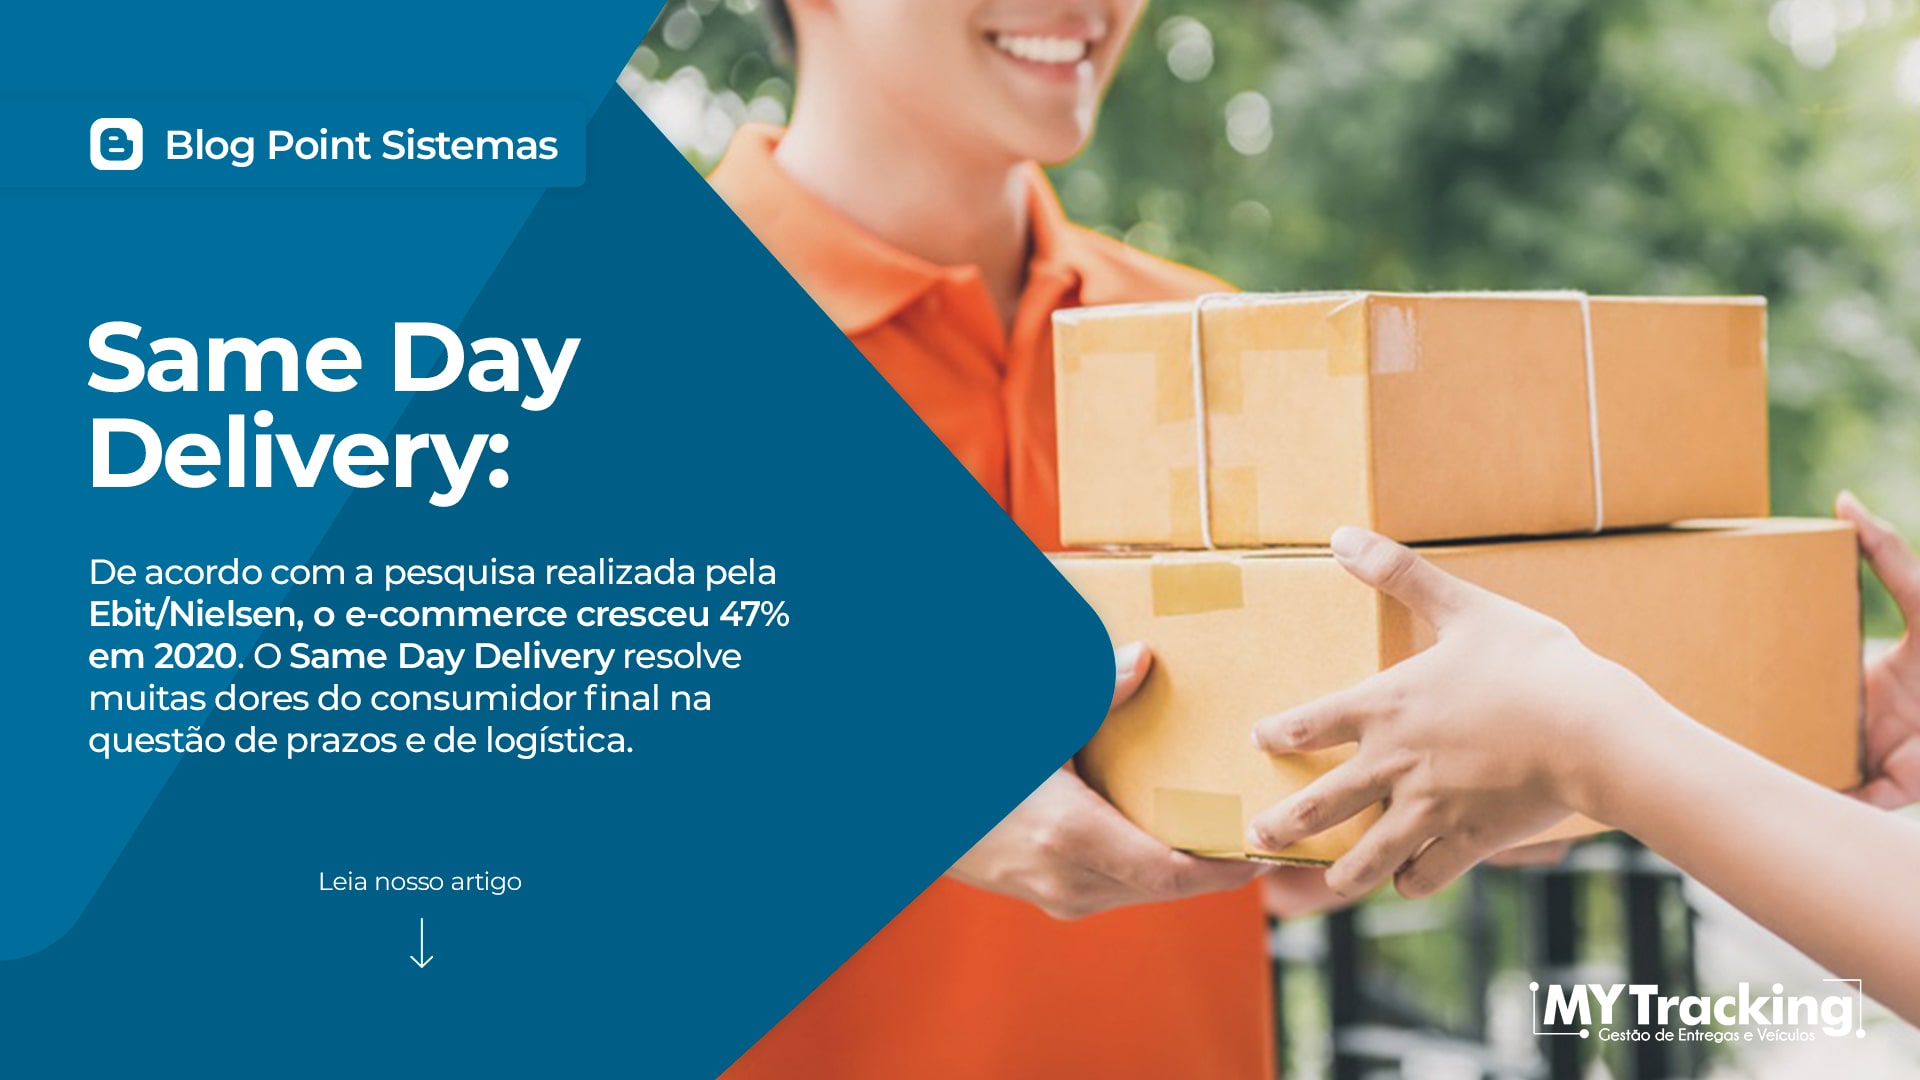 same day delivery service